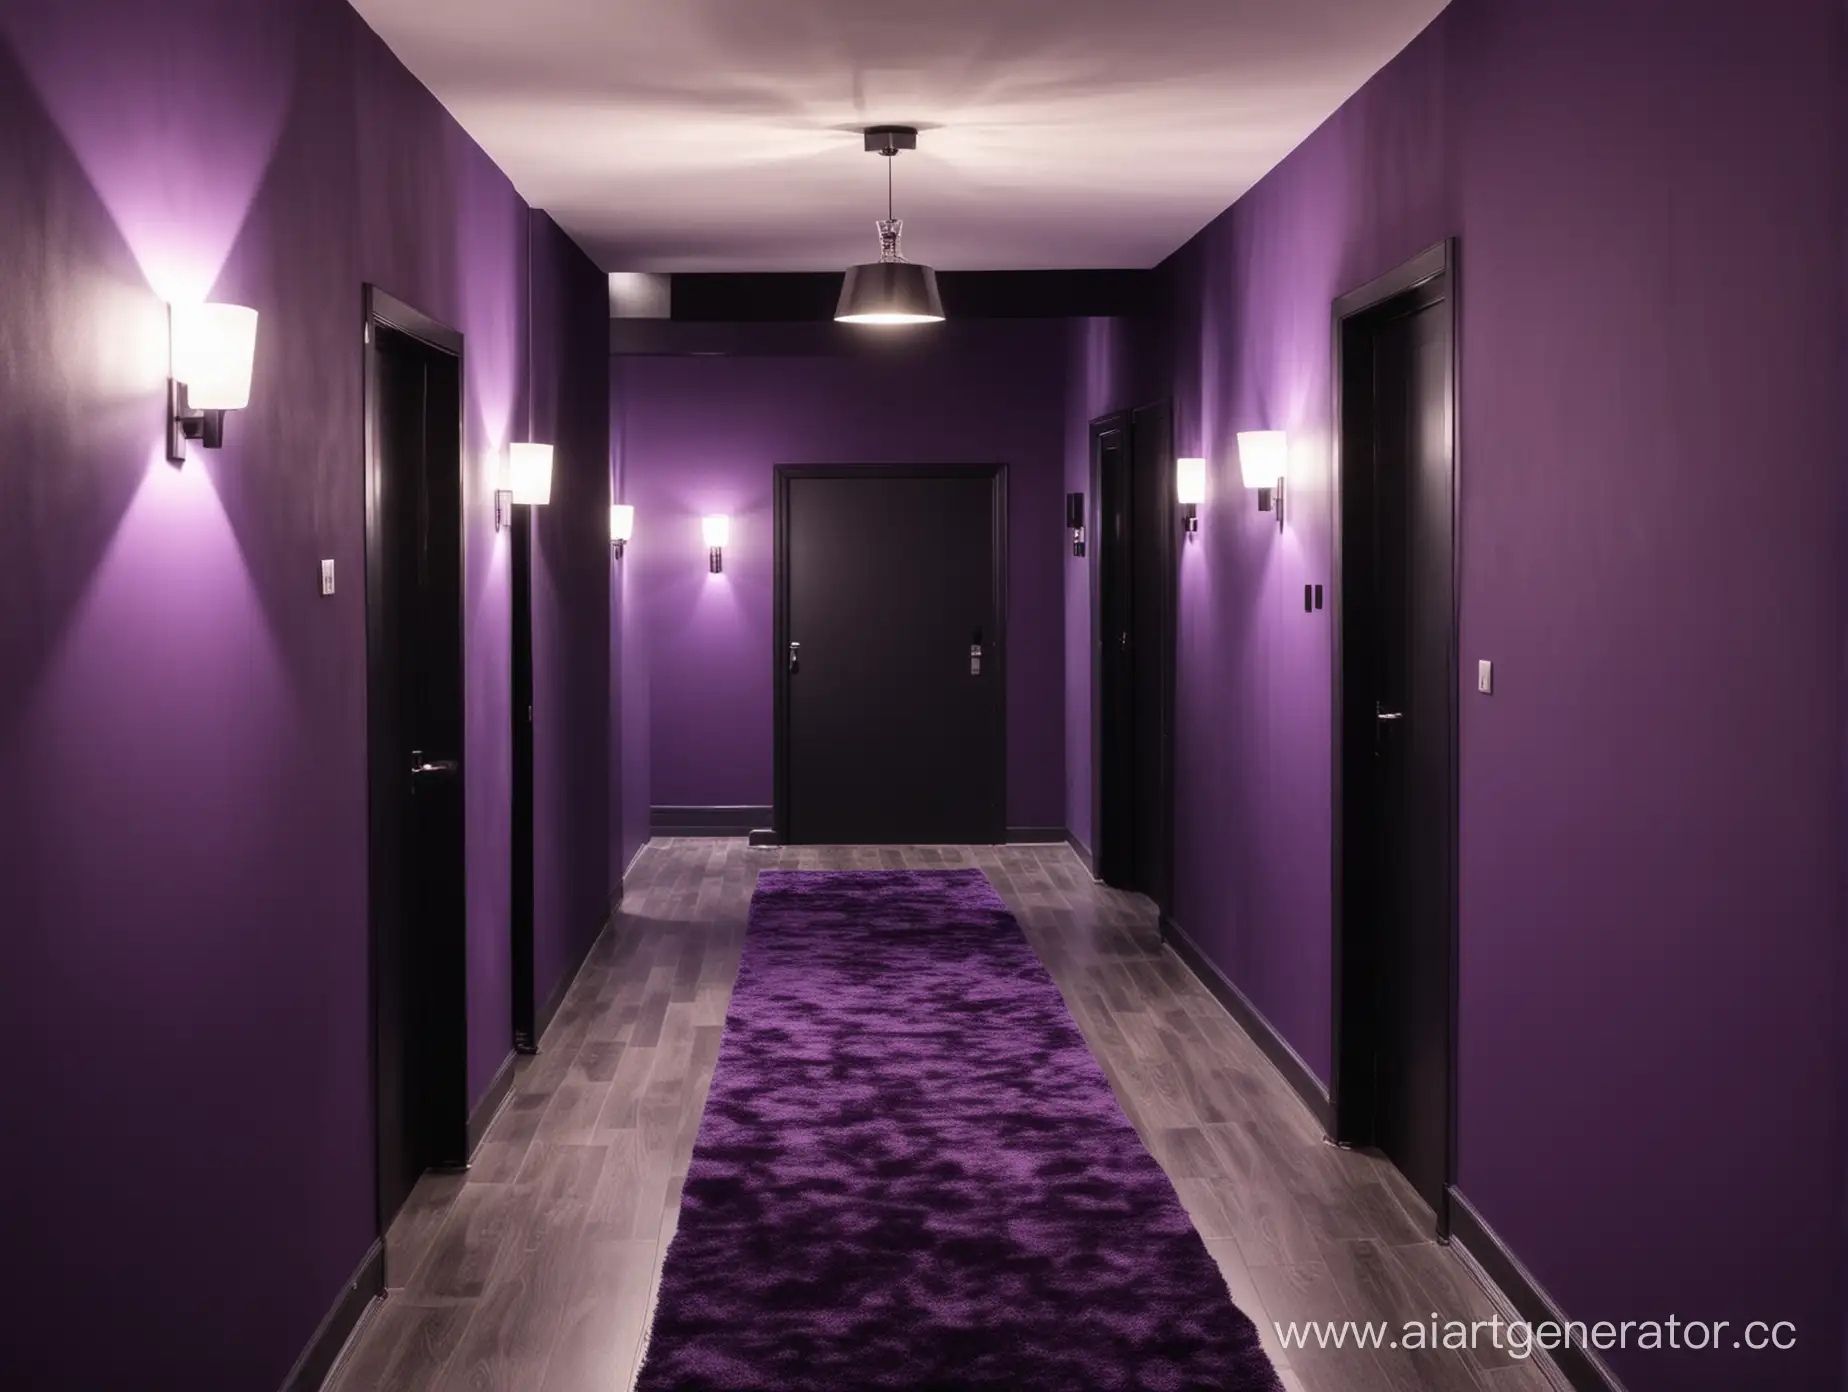 Modern-Apartment-Corridor-with-Violet-Walls-and-Black-Shadows